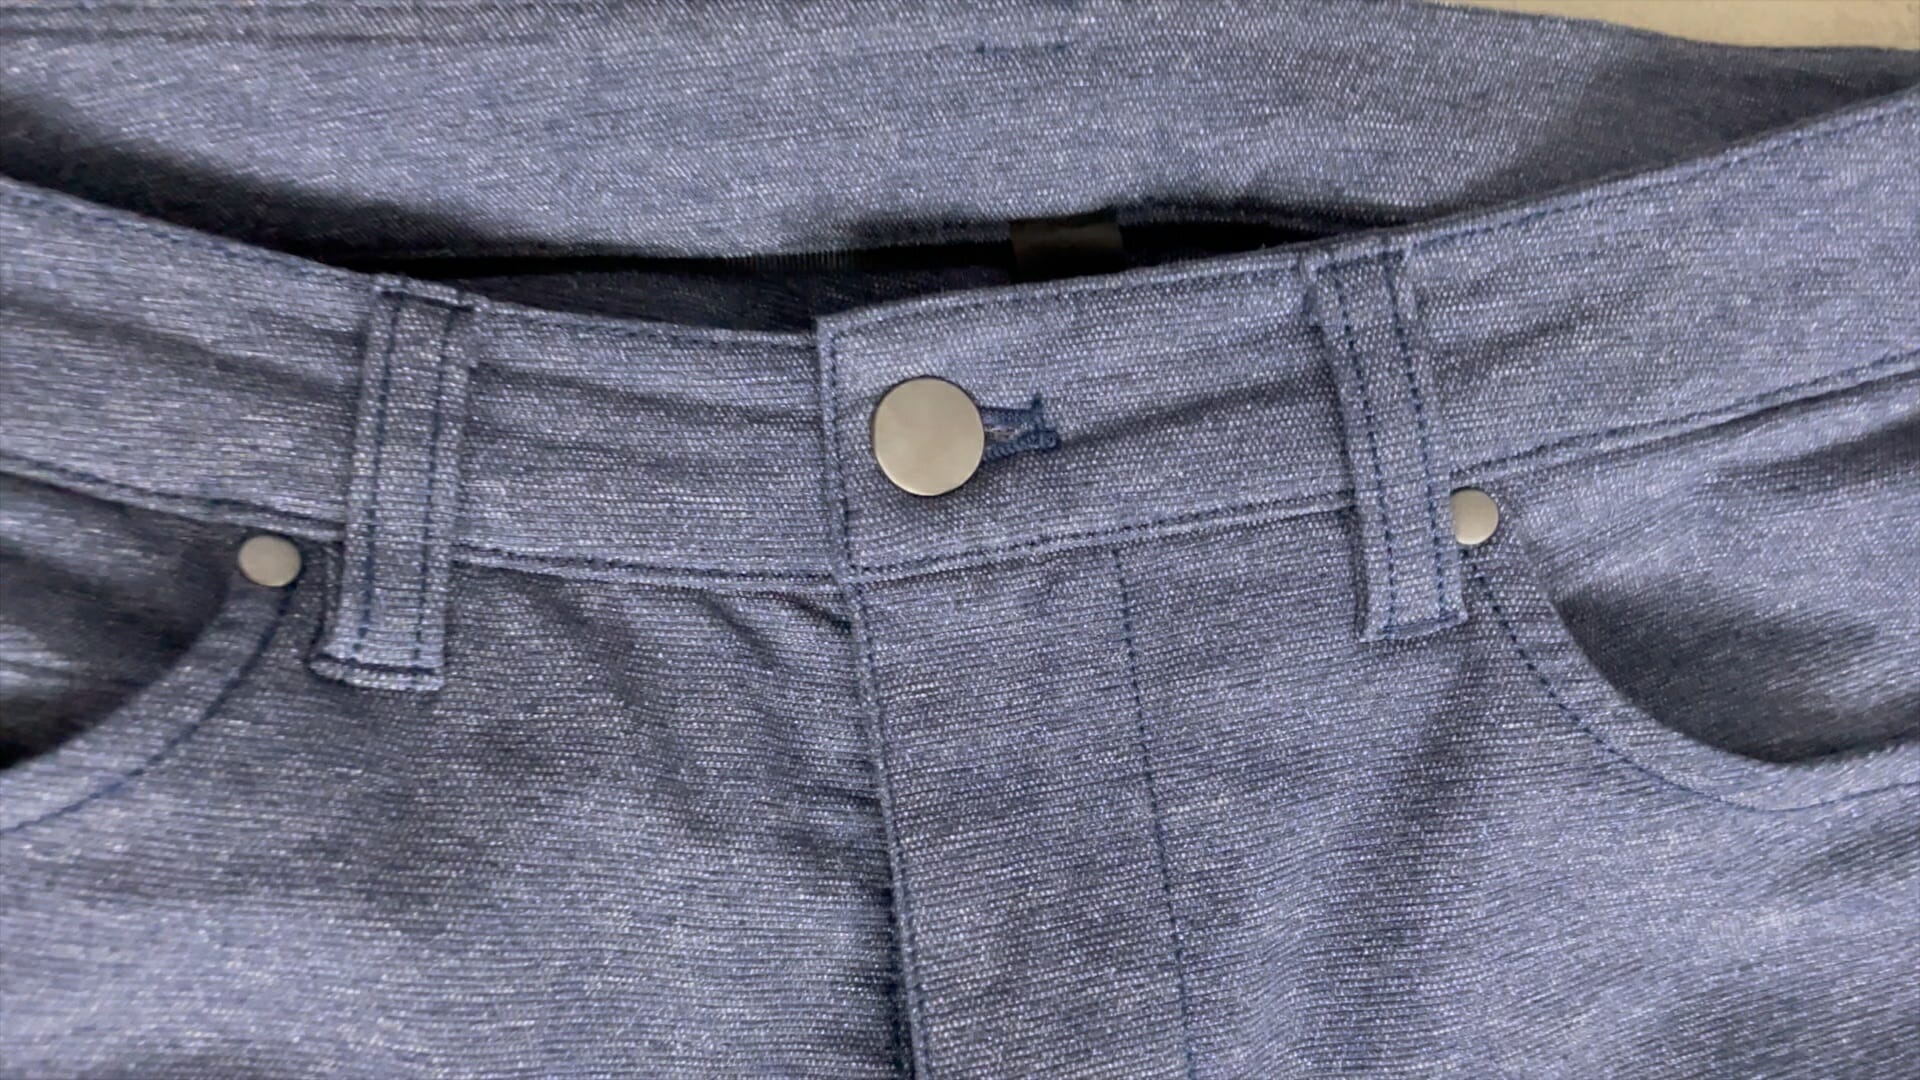 Lululemon "Jeans" are Here: Lululemon Tech Canvas Review 4